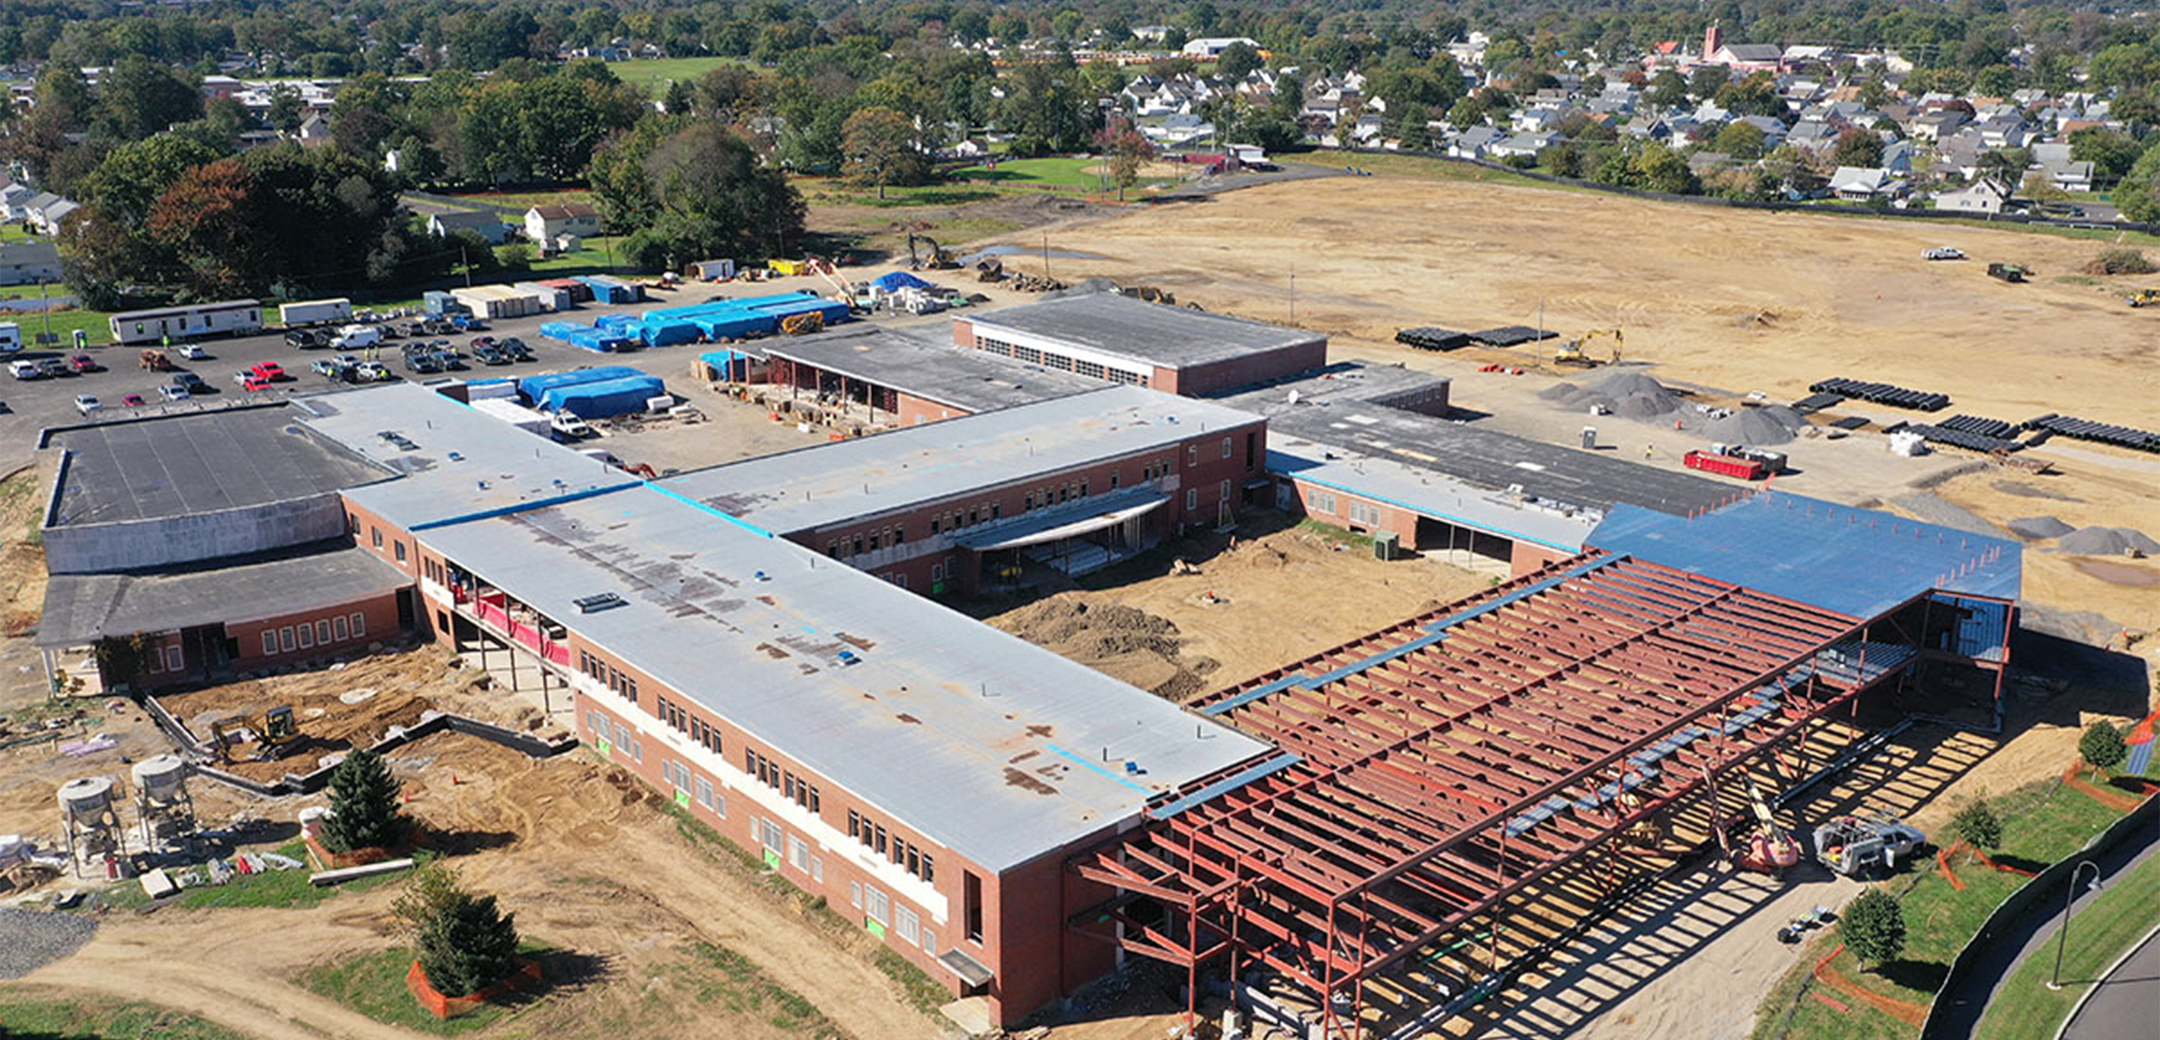 A drone aerial image of the Ben Franklin Middle School during the construction process showcasing the framework and finished parts of the building.